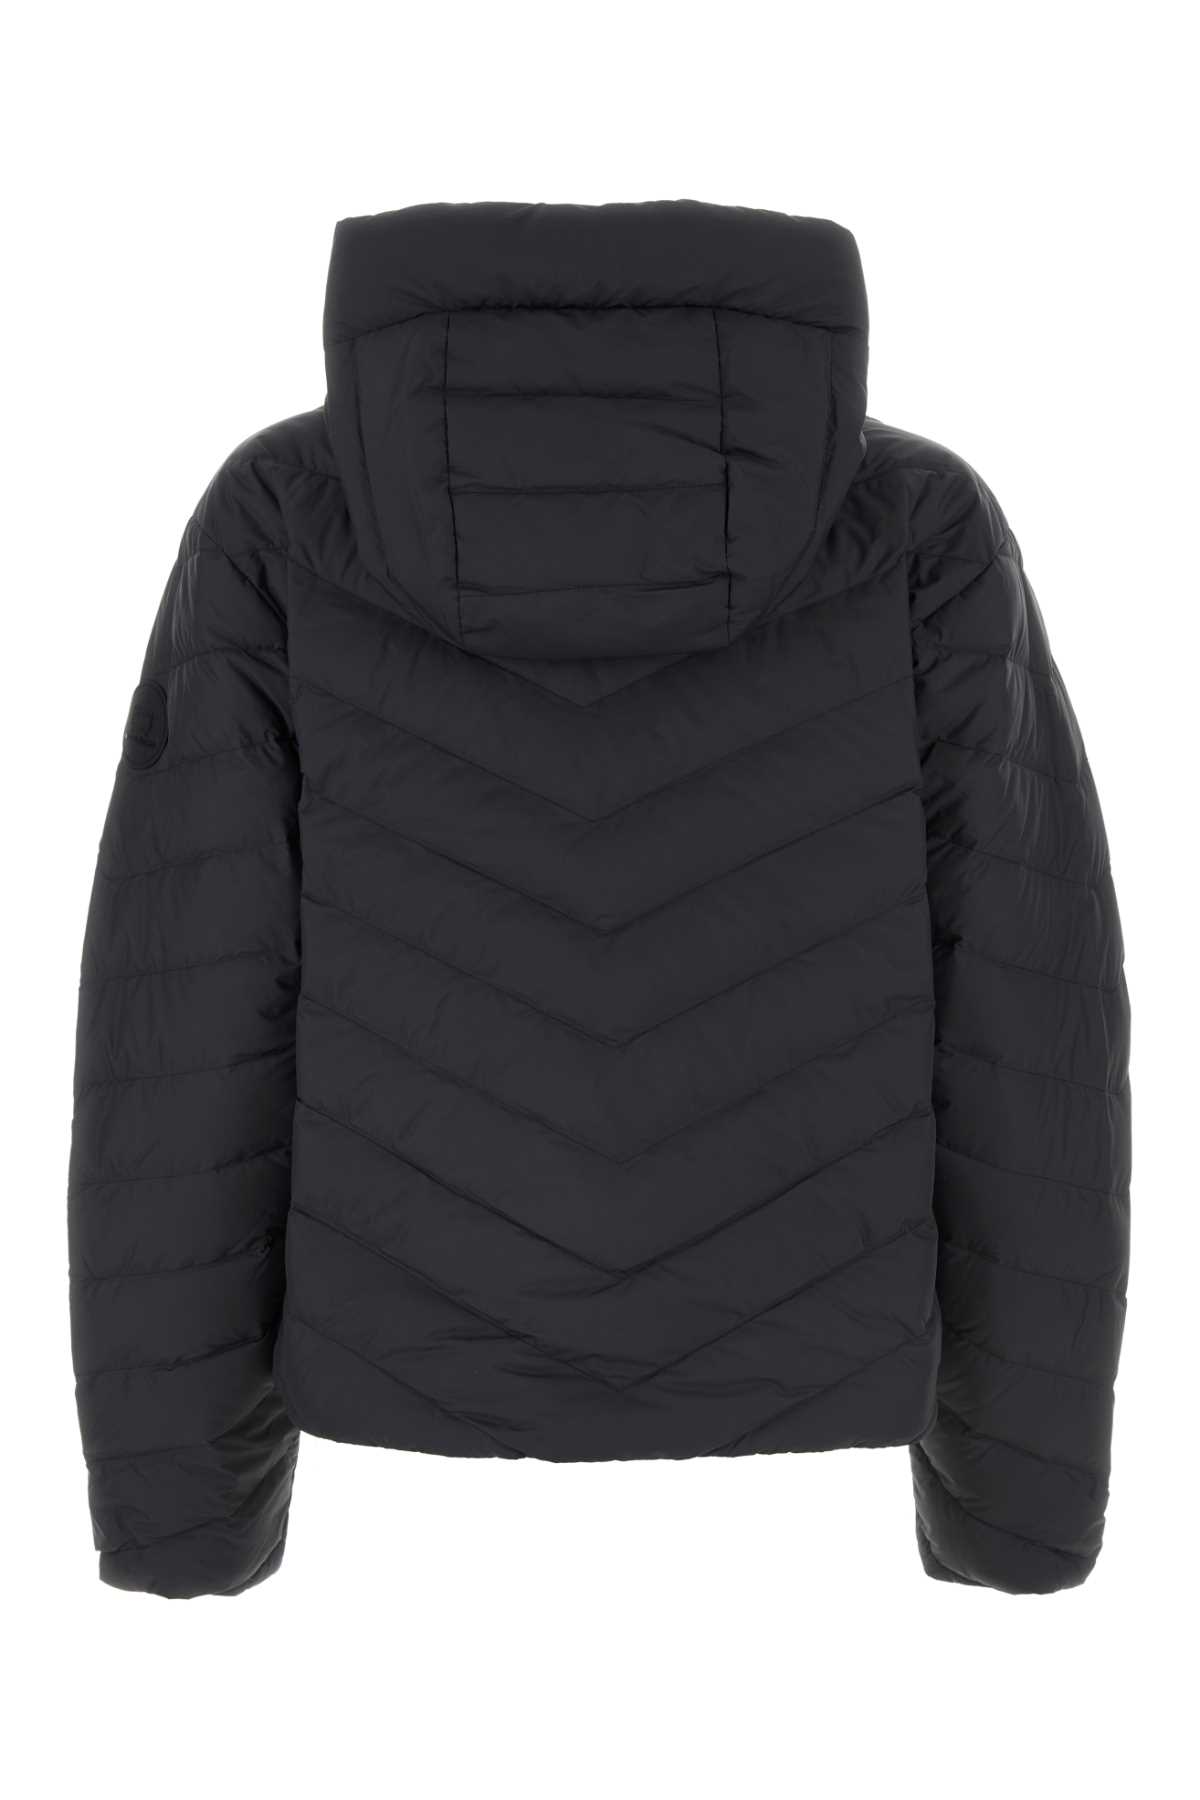 Woolrich Black Polyester Down Jacket